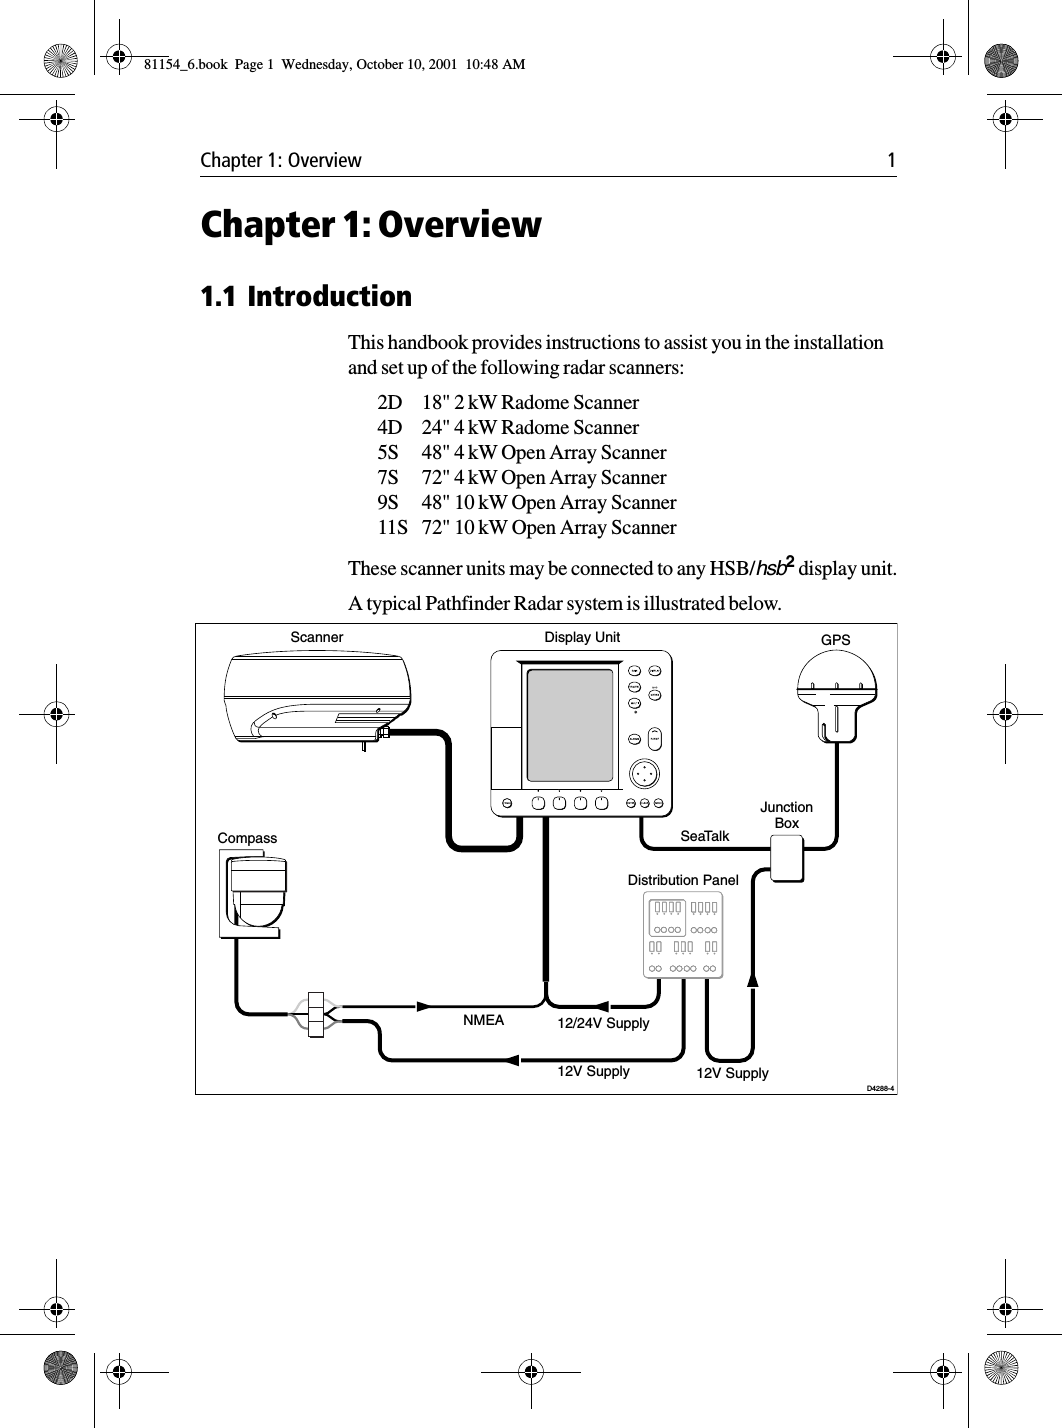 Chapter 1: Overview 1Chapter 1: Overview1.1 IntroductionThis handbook provides instructions to assist you in the installation and set up of the following radar scanners:2D 18&quot; 2 kW Radome Scanner4D 24&quot; 4 kW Radome Scanner5S 48&quot; 4 kW Open Array Scanner7S 72&quot; 4 kW Open Array Scanner9S 48&quot; 10 kW Open Array Scanner11S 72&quot; 10 kW Open Array ScannerThese scanner units may be connected to any HSB/hsb2 display unit.A typical Pathfinder Radar system is illustrated below.NMEASeaTalkDisplay UnitDistribution PanelD4288-4Scanner12/24V Supply12V Supply 12V SupplyJunctionBoxGPSCompass81154_6.book  Page 1  Wednesday, October 10, 2001  10:48 AM